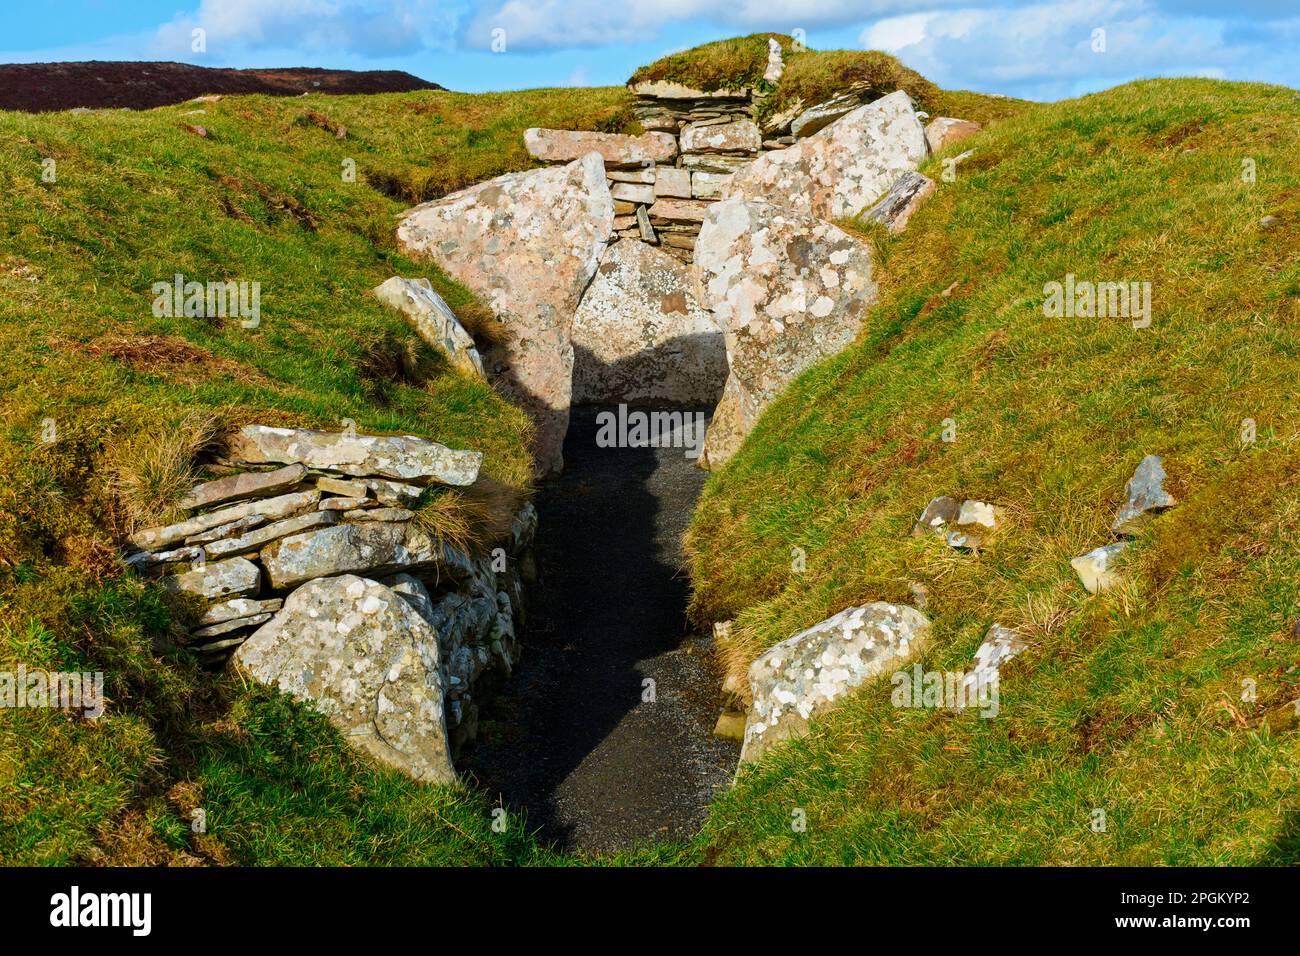 The Cairn o'Get chambered cairn, Caithness, Scotland, UK Stock Photo